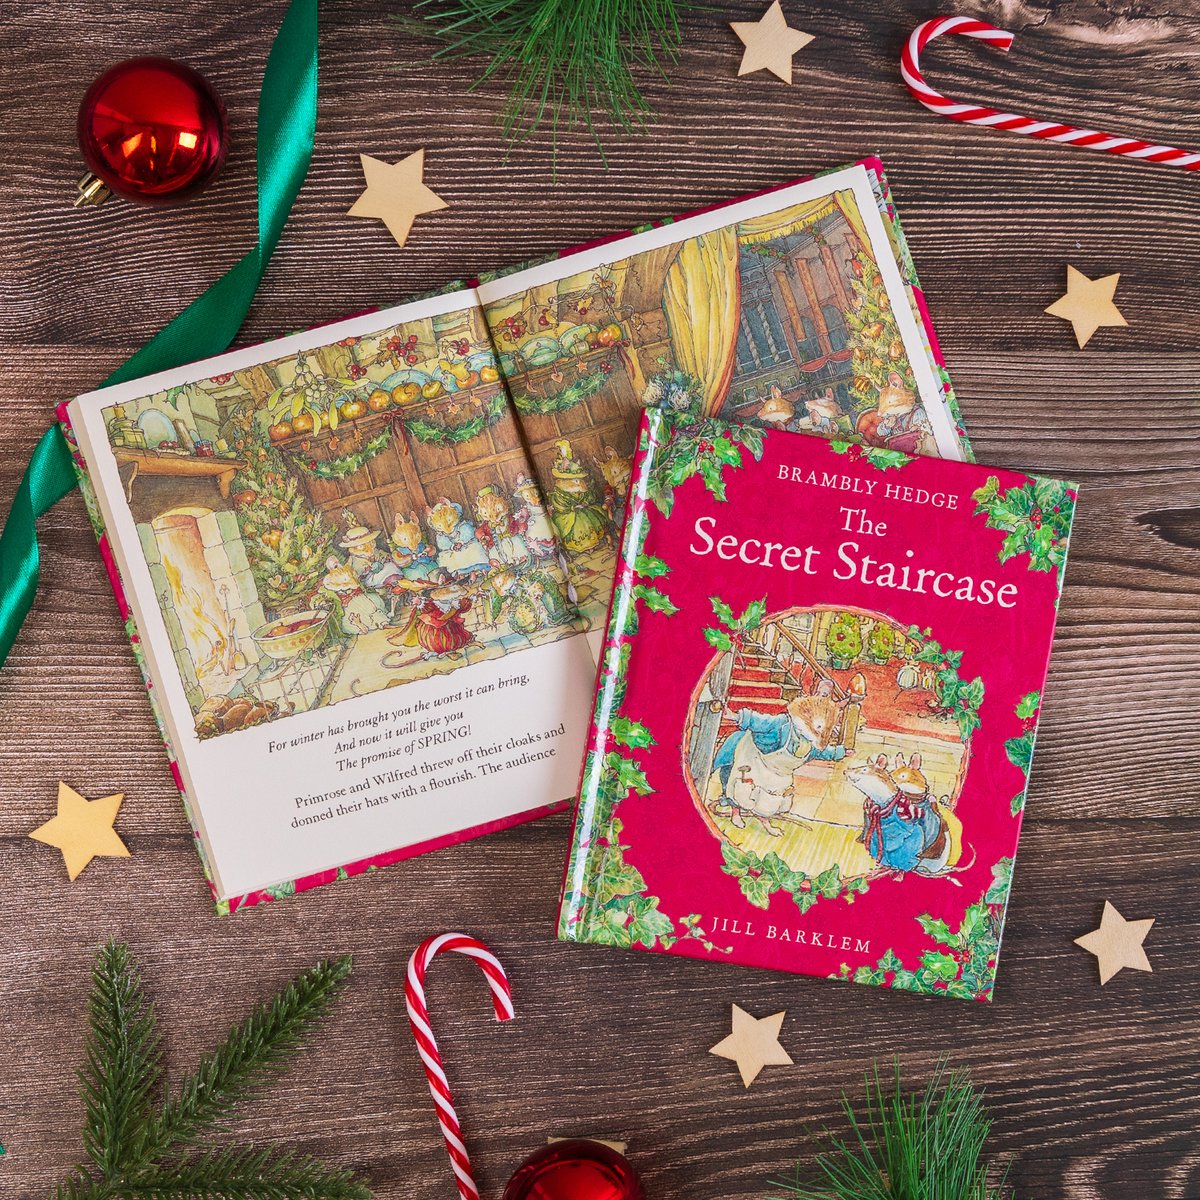 🎁HarperCollins Children’s #ChristmasCountdown🎁 ❄Join the Brambly Hedge mice in their traditional midwinter festivities in The Secret Staircase by Jill Barklem, a wonderful cosy classic celebrating its 40th anniversary this year!🐭 @bramblyhedge_ #SecretStaircase40